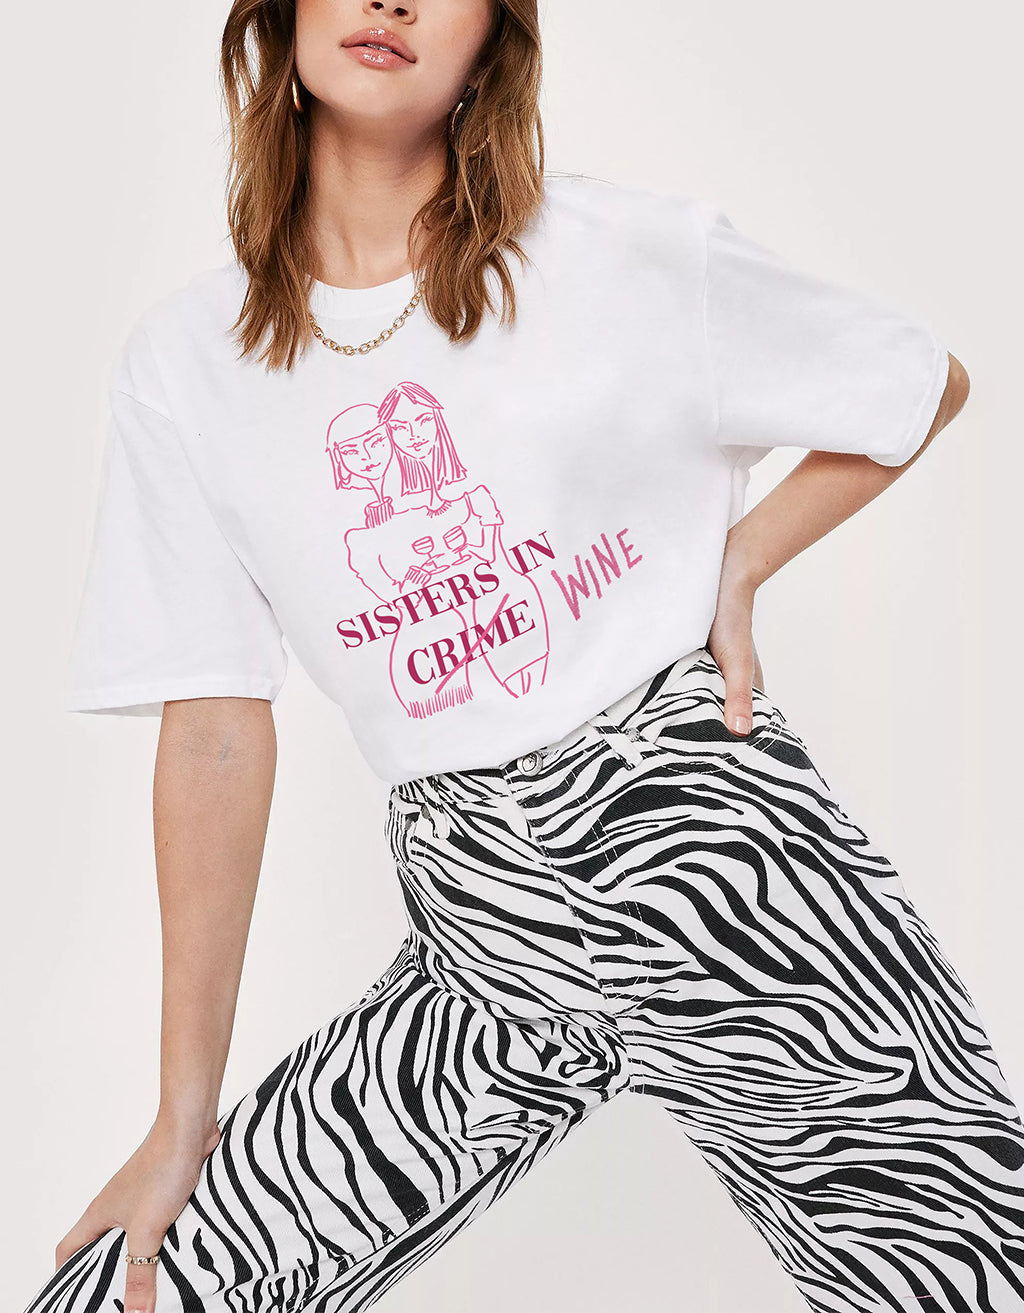 T-Shirt  "Sisters in wine"